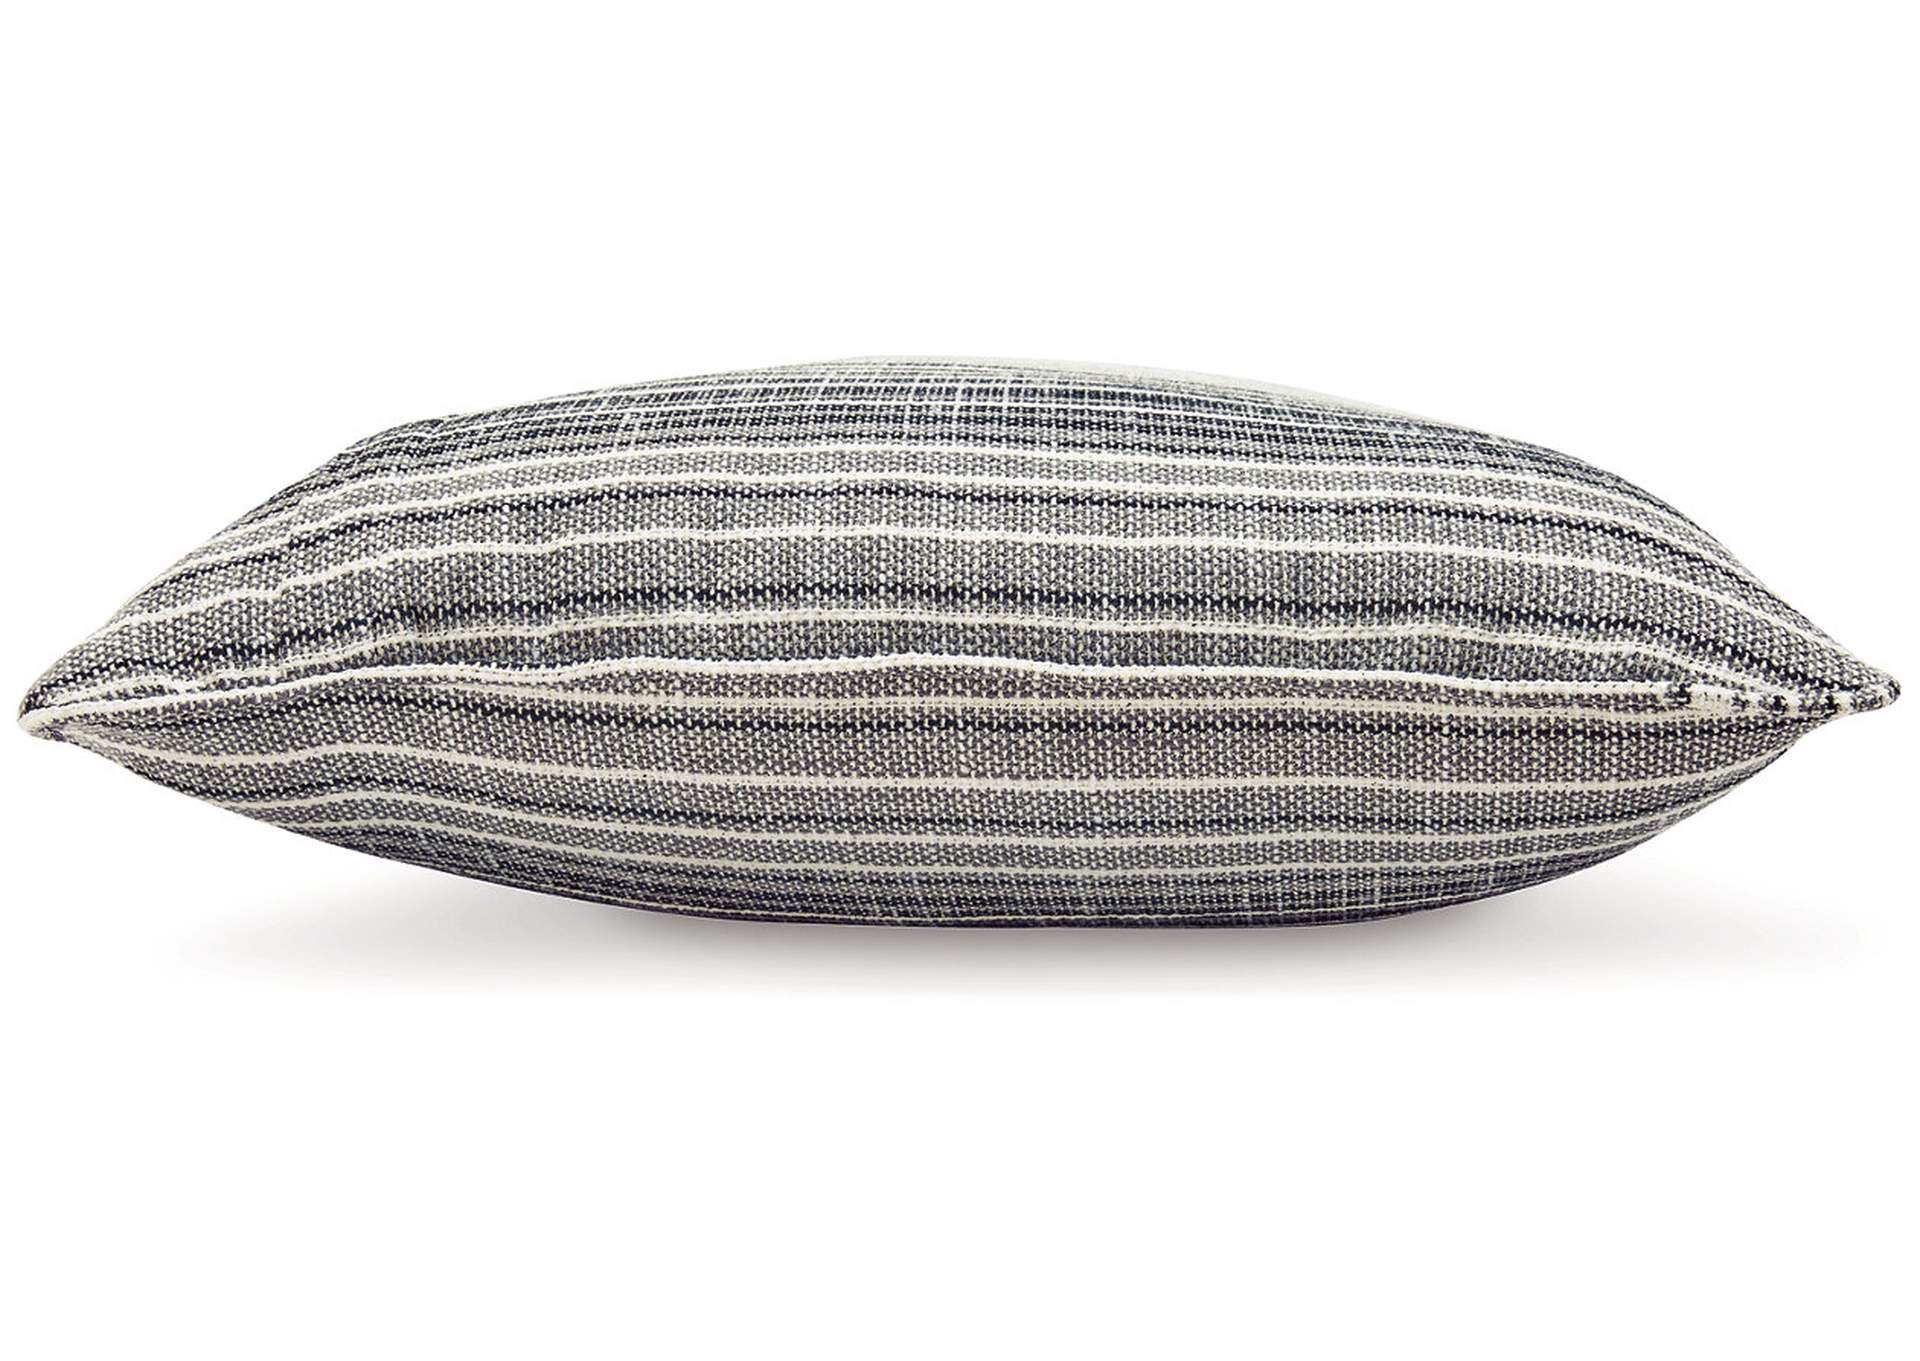 Chadby Next-Gen Nuvella Pillow,Signature Design By Ashley